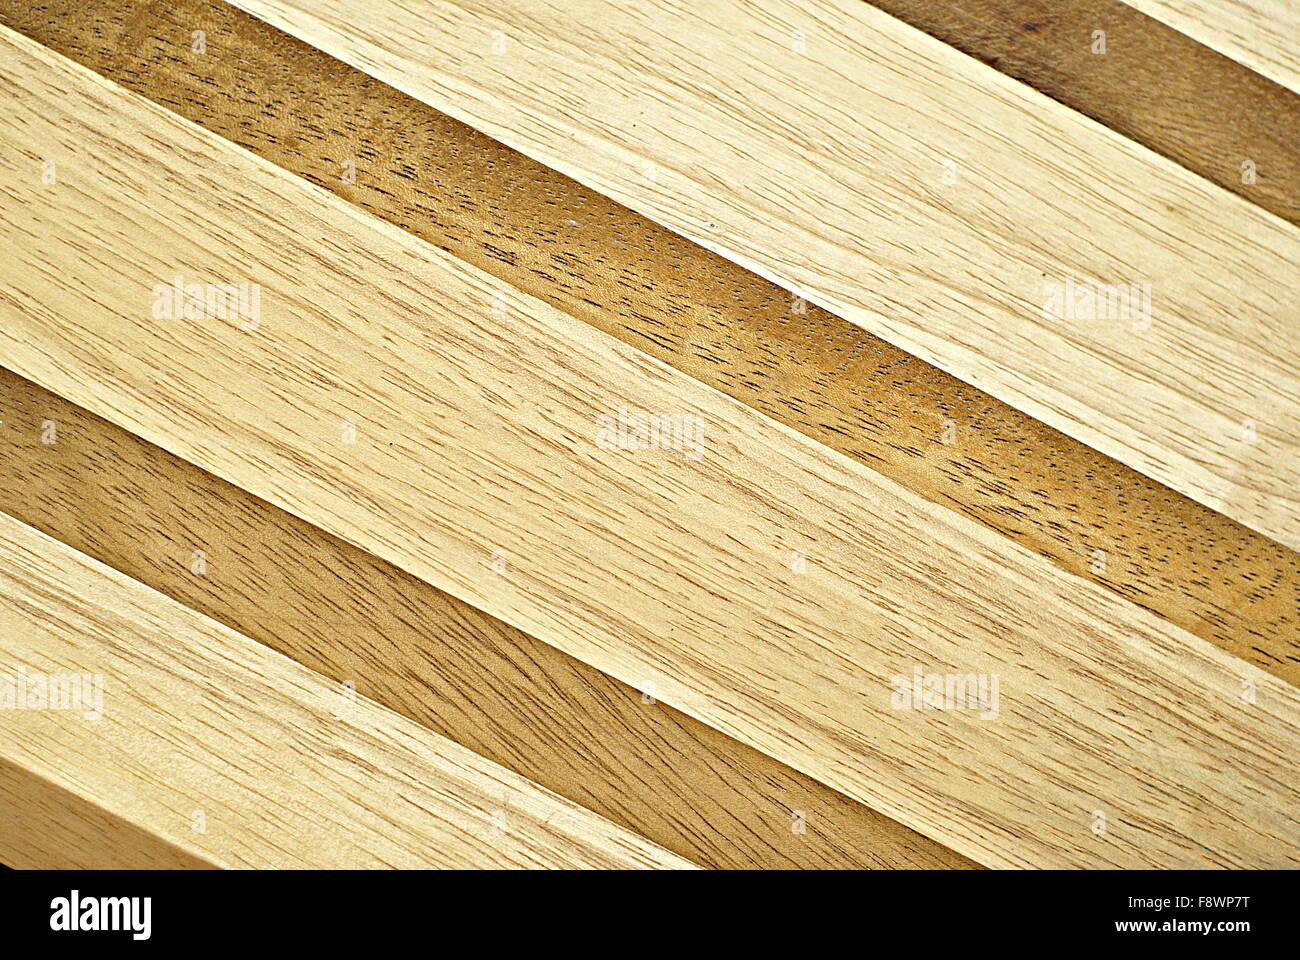 Diagonal lacquered wooden pattern Stock Photo